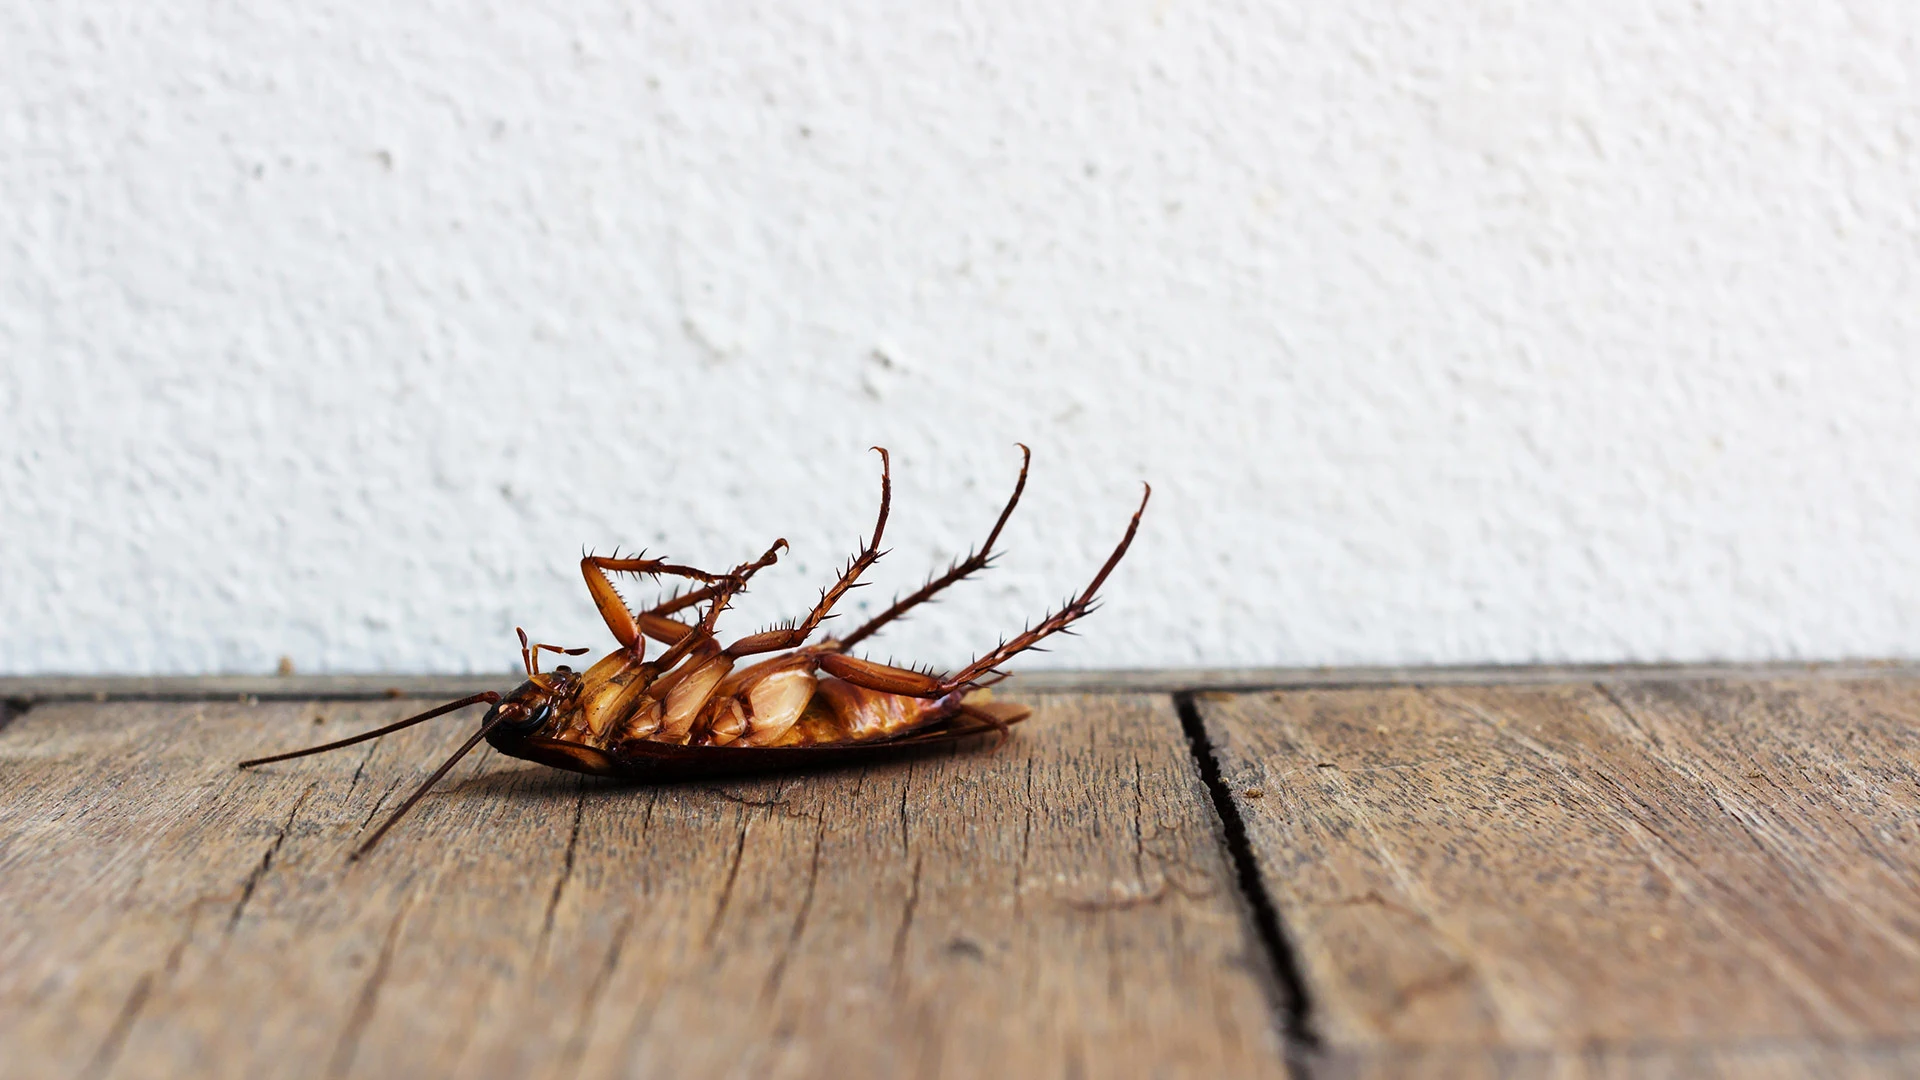 Cockroach dead on a wood floor by a white wall in Fairview, TX.